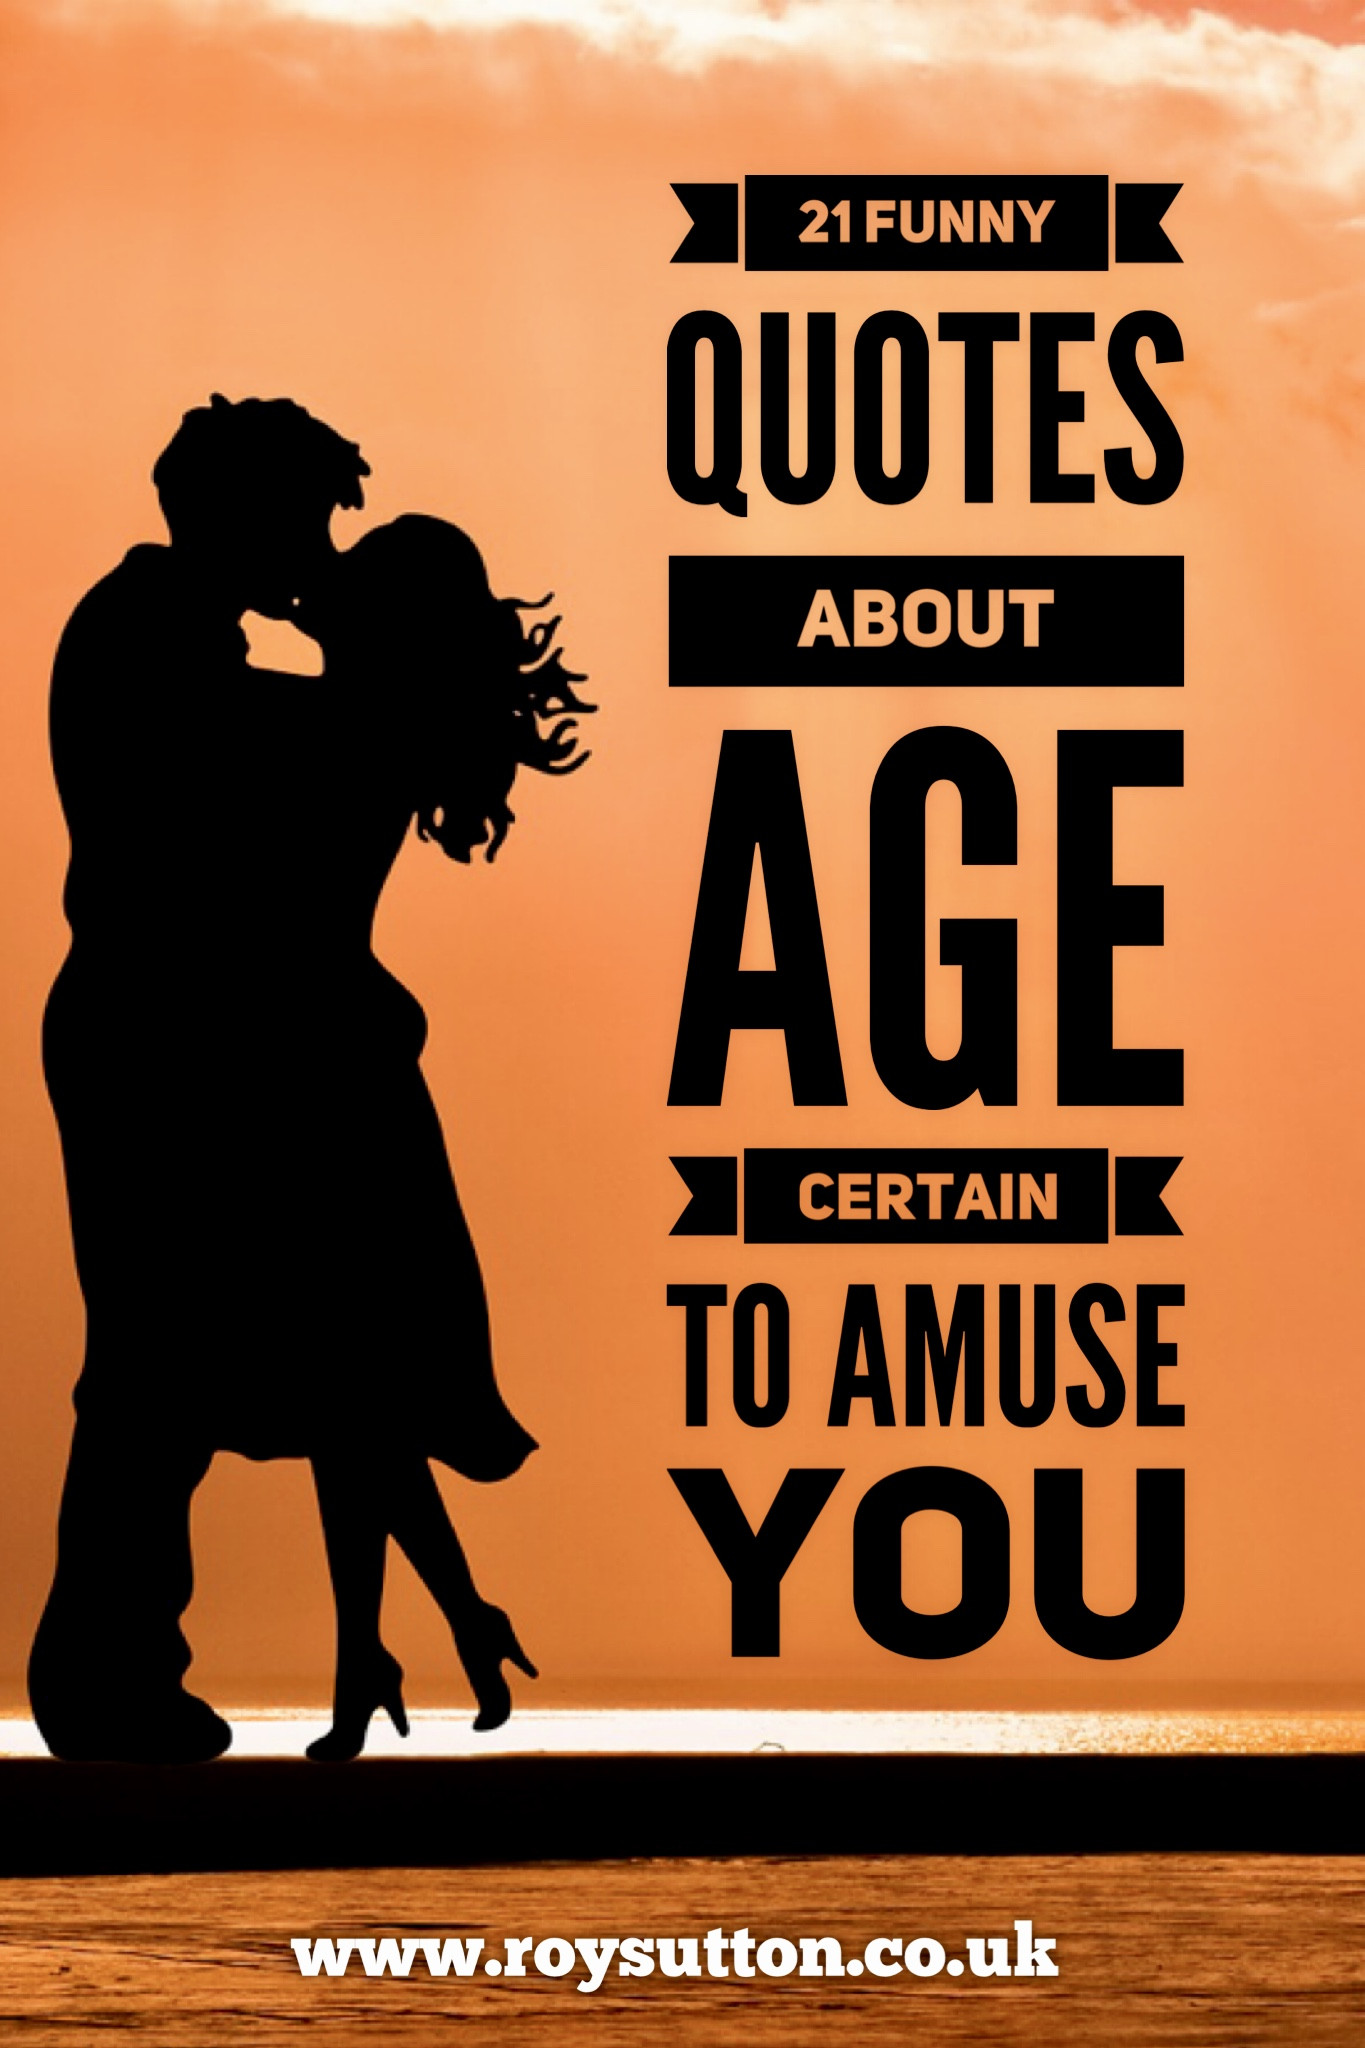 Funny Quotes And Pictures
 21 funny quotes about age certain to amuse you Roy Sutton